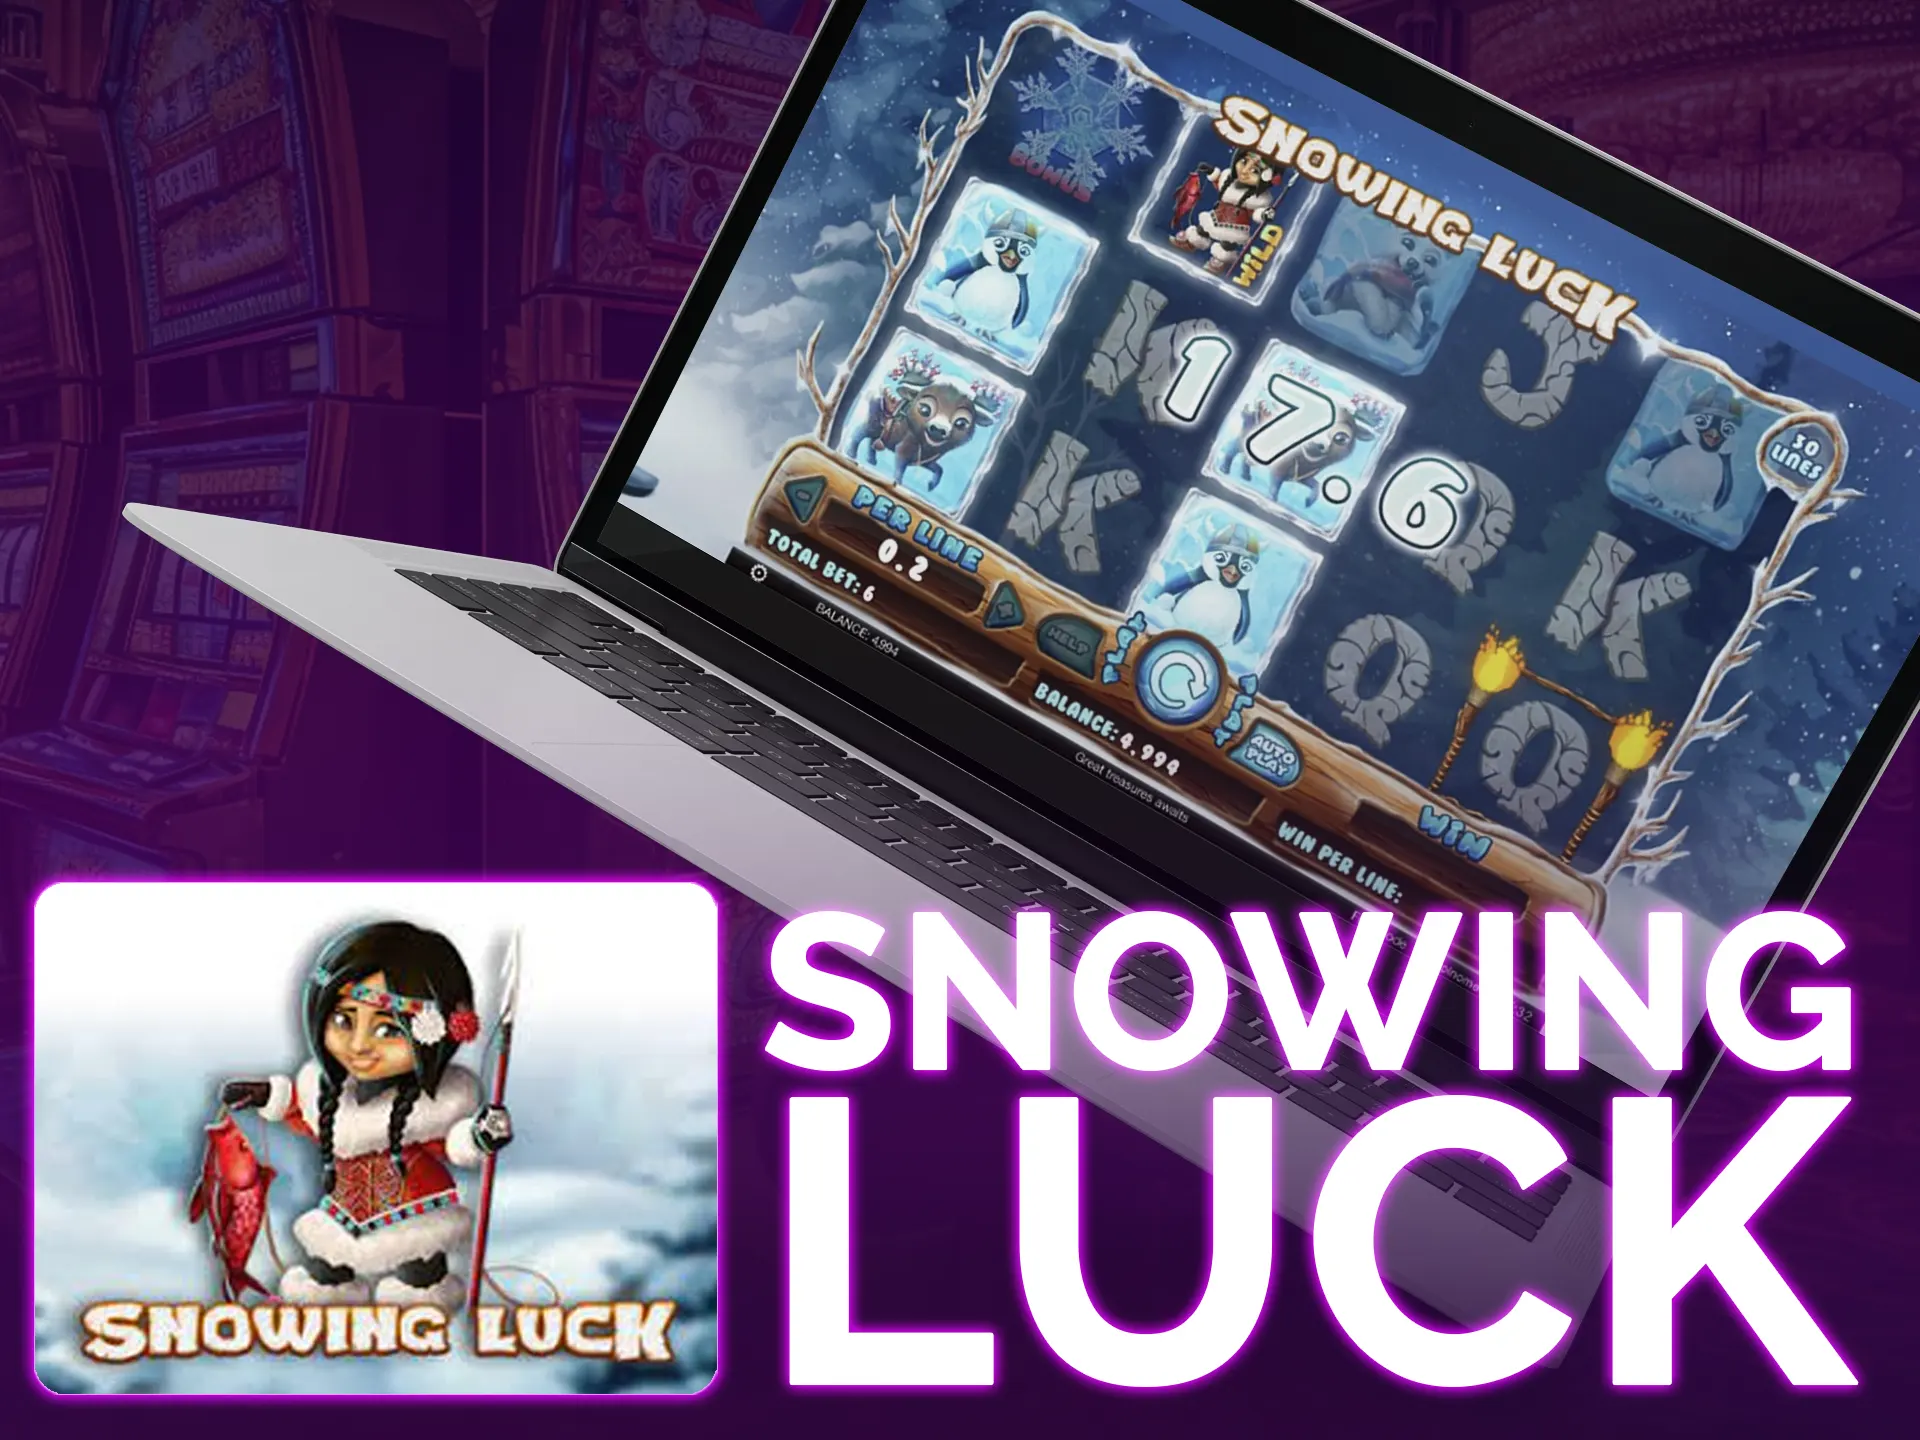 Snowing luck it`s a winter-themed slot: Snowman brings 10 free spins, 94.75% payout ratio.